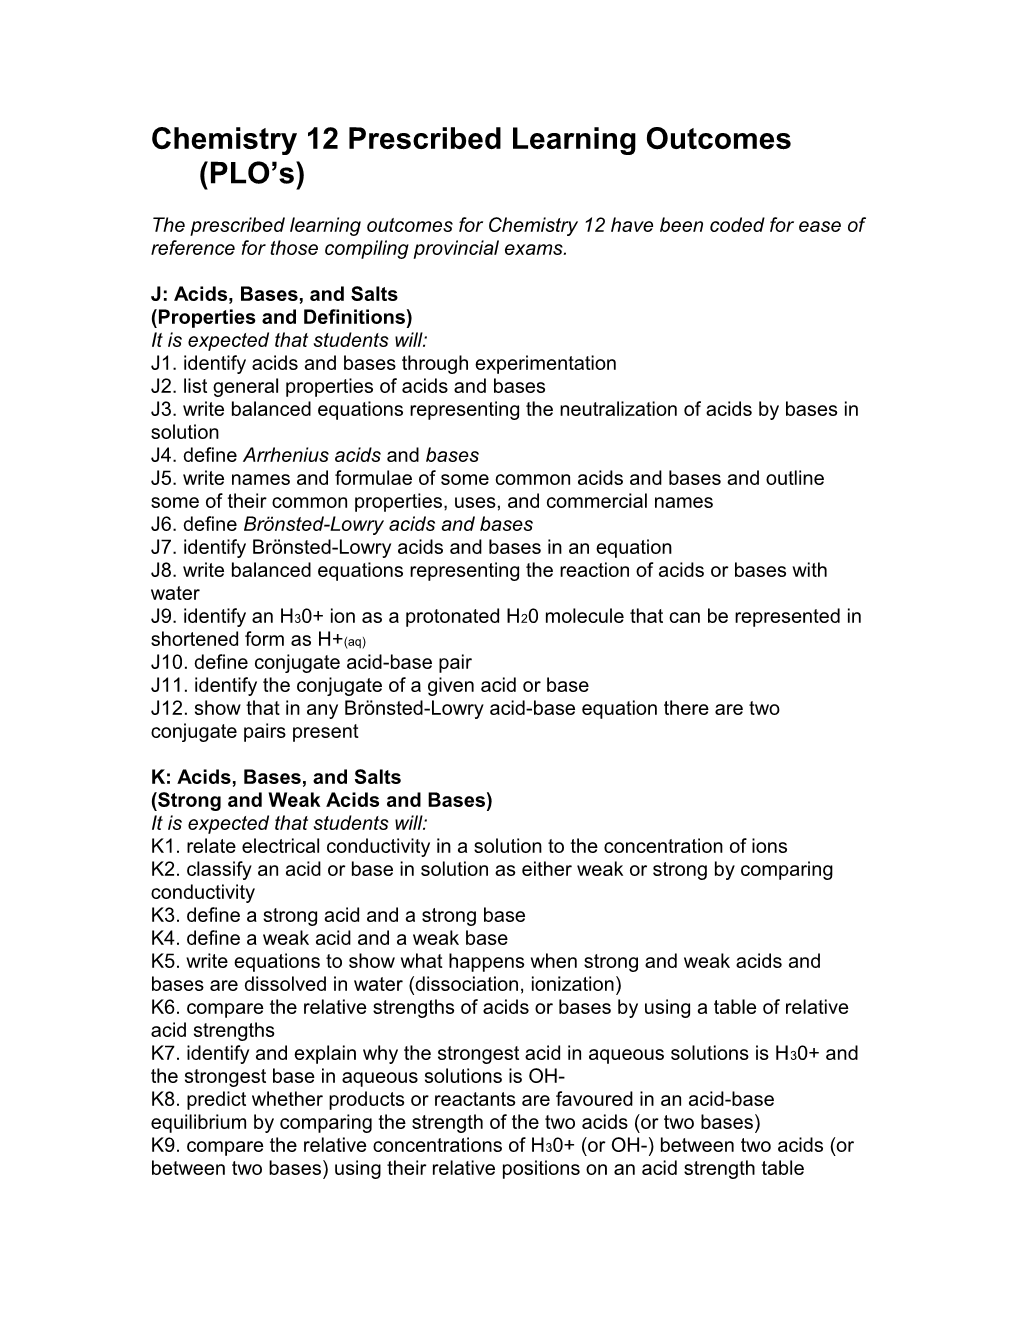 Chemistry 12 Prescribed Learning Outcomes (PLO S)